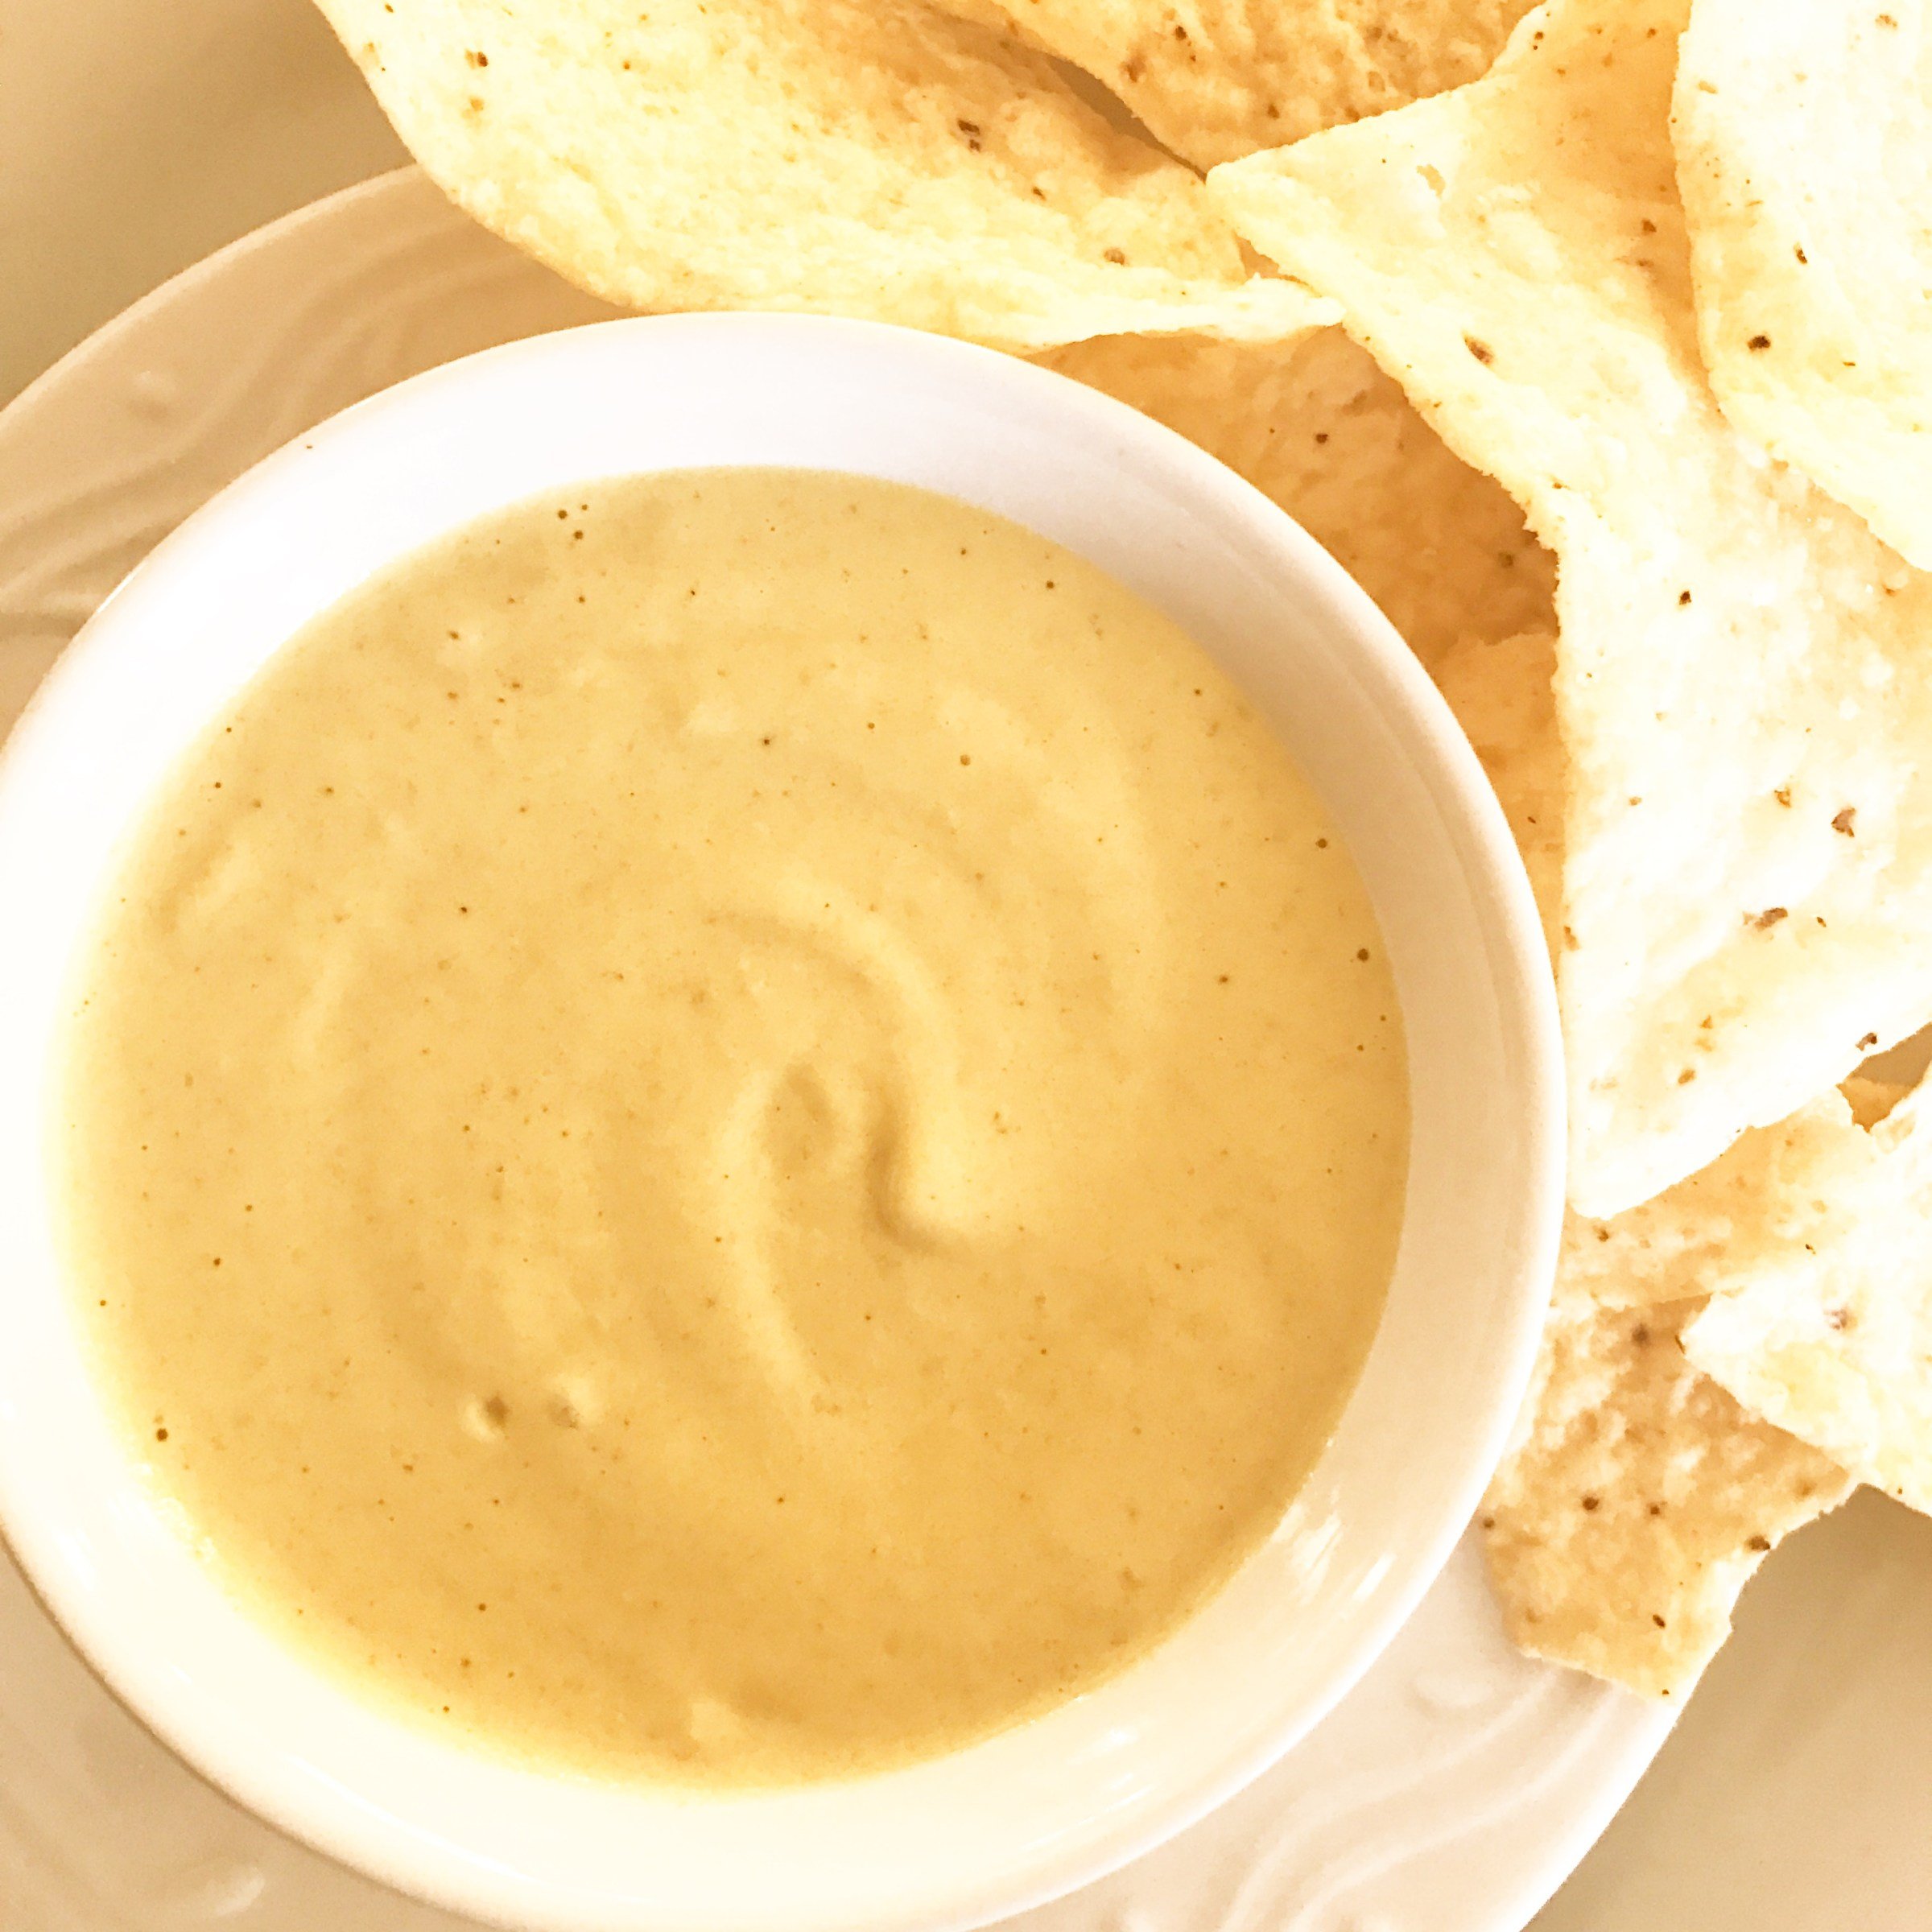 Vegan Green Chile Cheese Sauce - Every vegan home cook needs a solid cheese sauce that they can use for everything from nachos to burgers to pasta to dips. This is that sauce. via @thiswifecooks